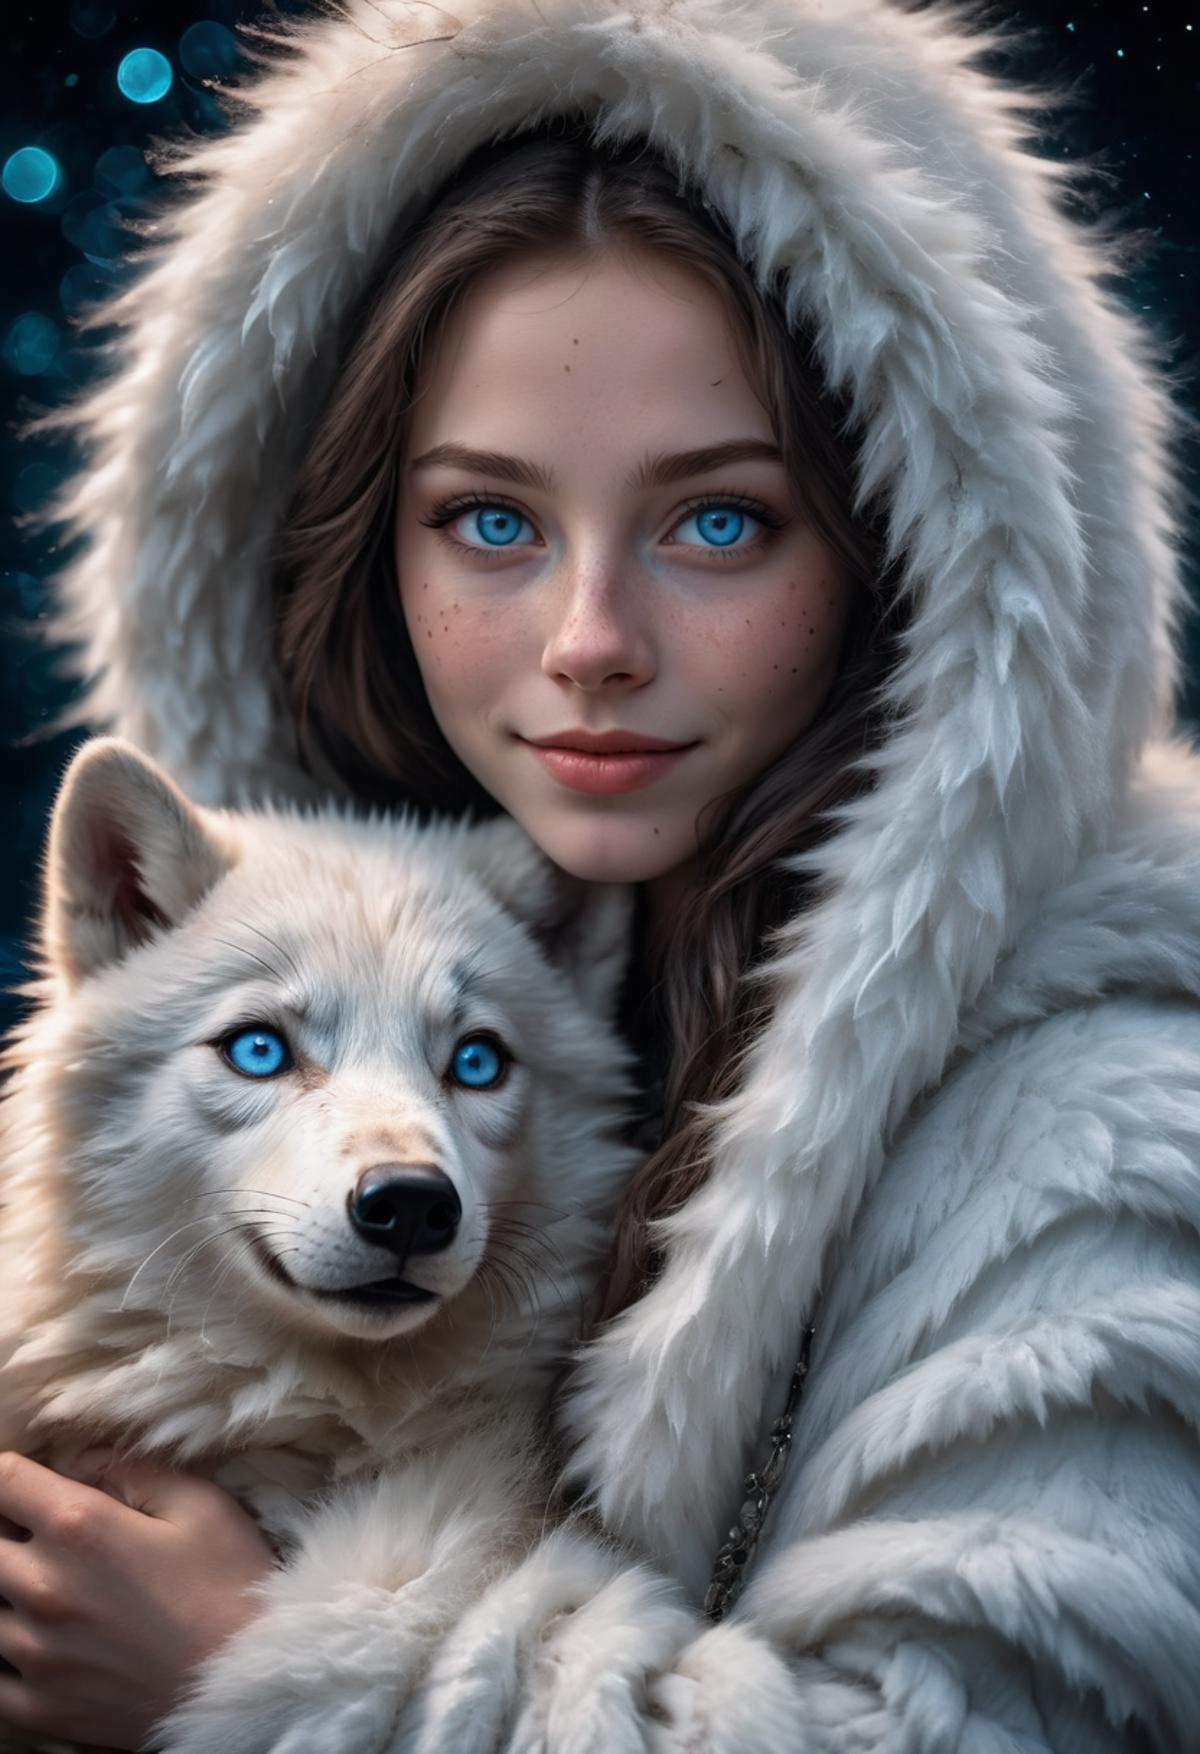 A girl with blue eyes and a white coat holding a white dog.